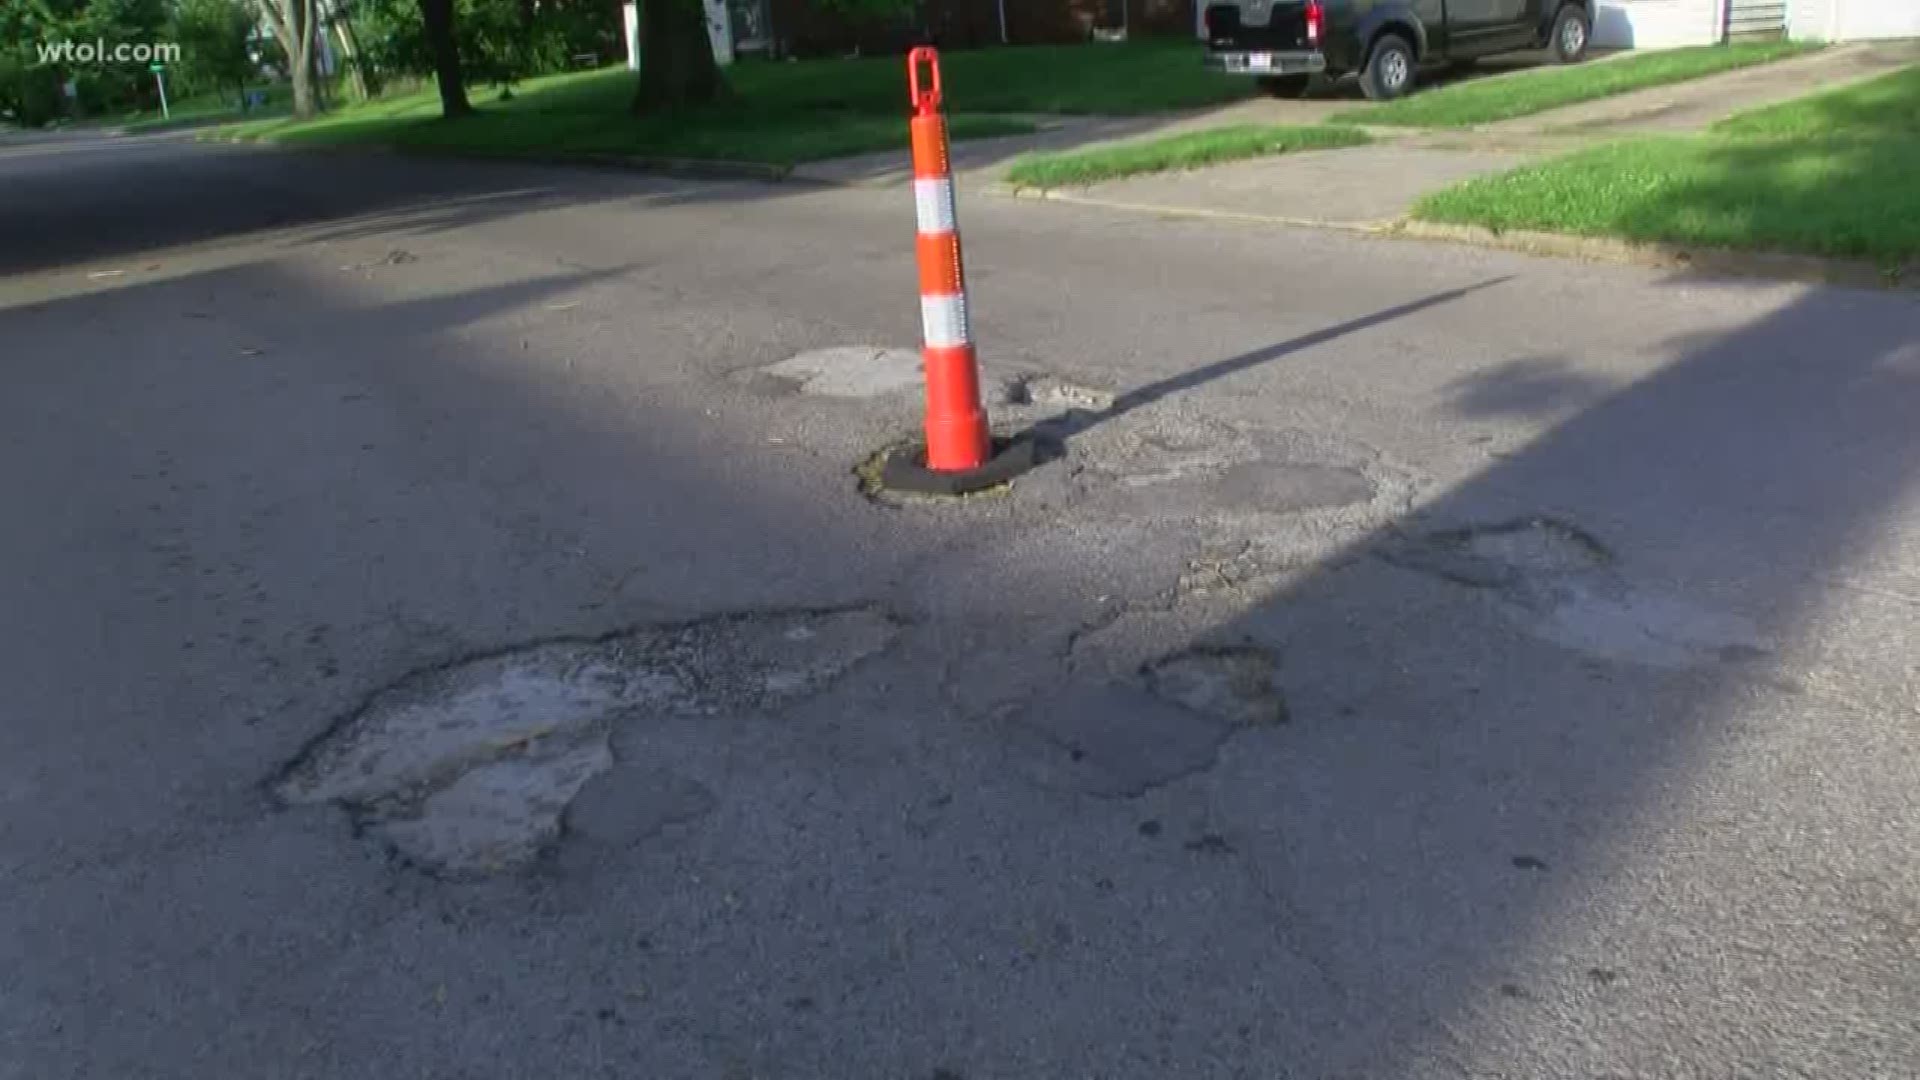 As of Saturday, city has filled more than 45,000 potholes, officials say